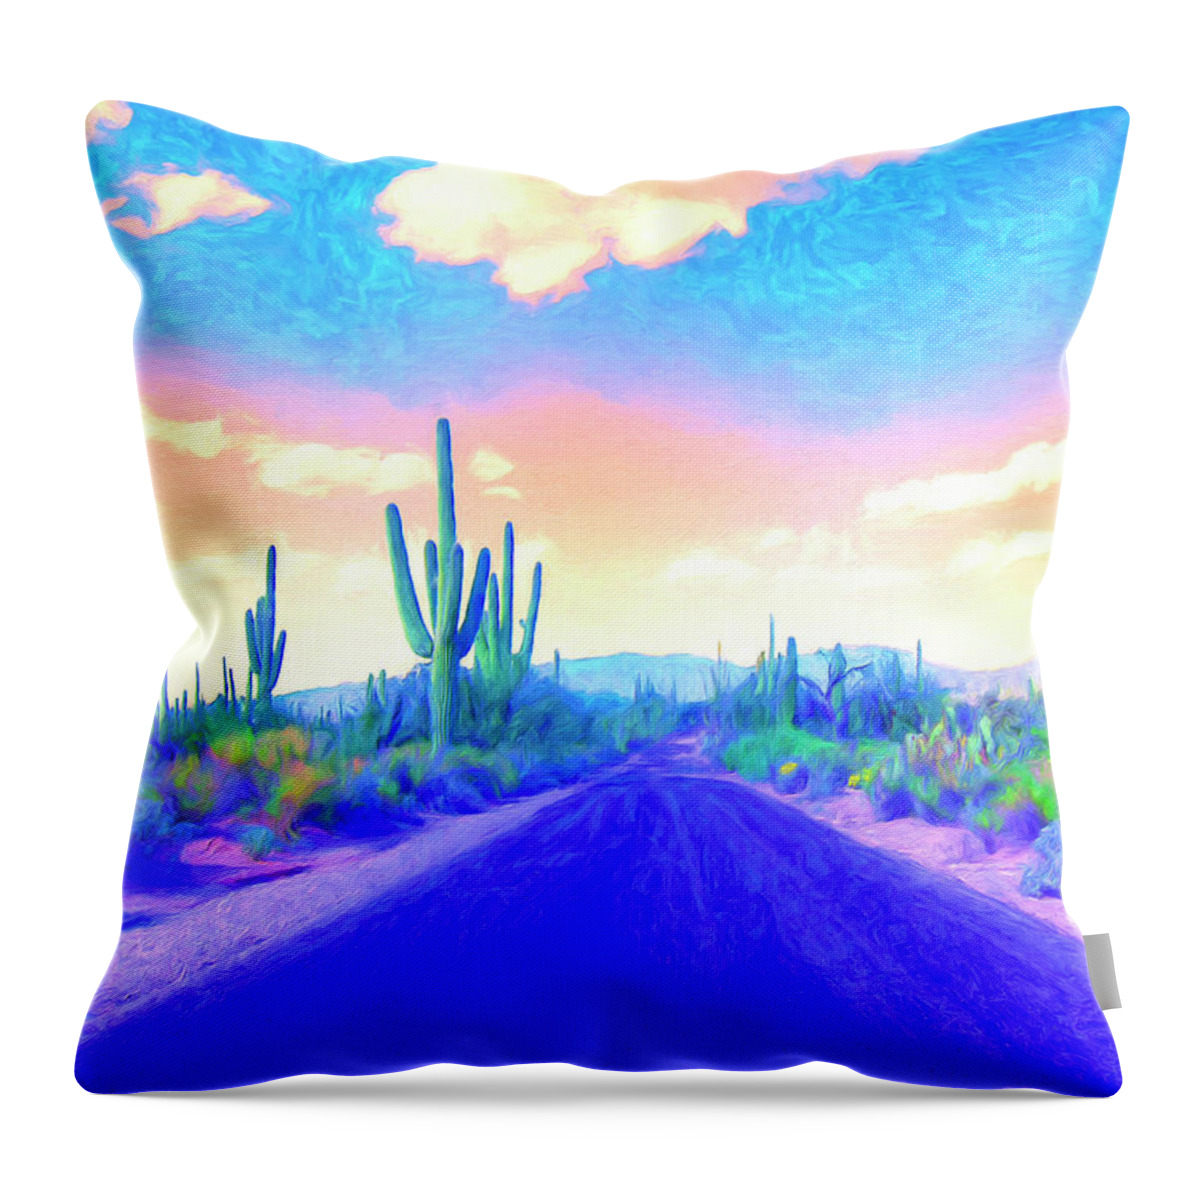 Desert Throw Pillow featuring the painting Blue Highway 6 by Dominic Piperata